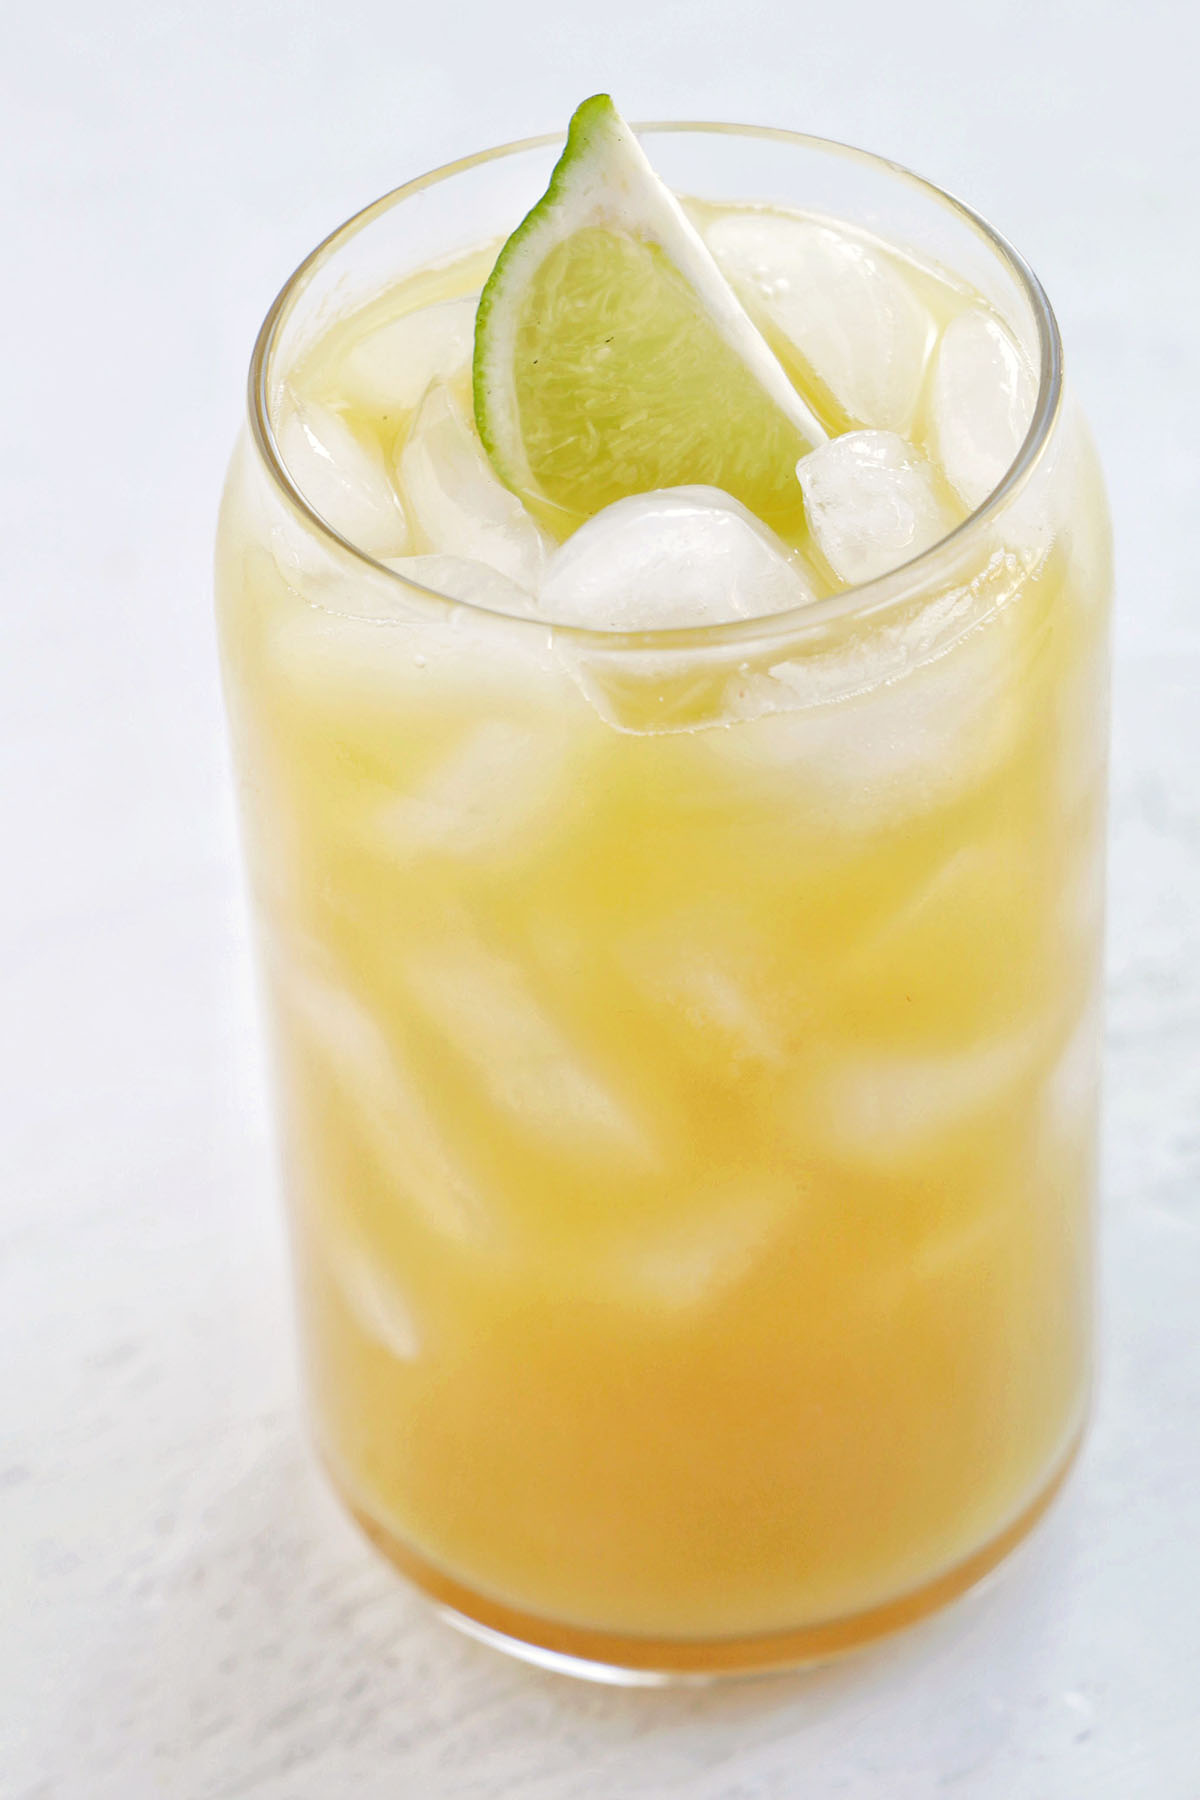 tropical pineapple drink with lime garnish.